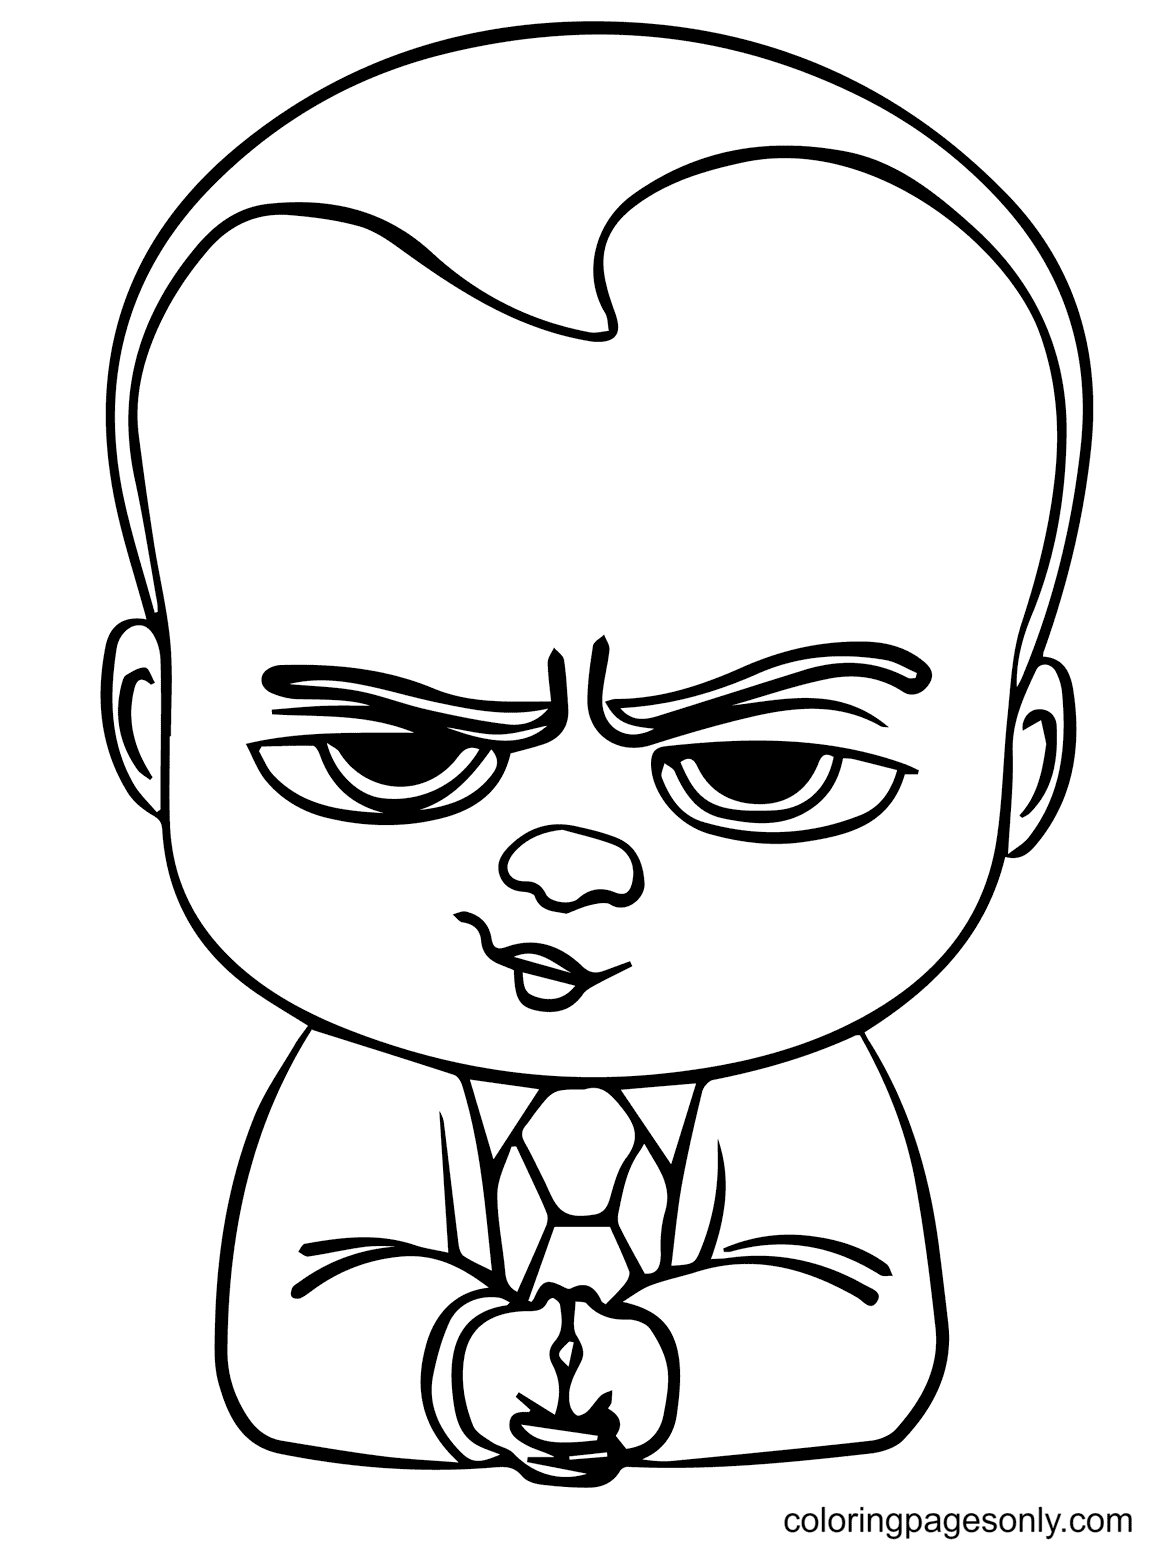 The Boss Baby Coloring Page